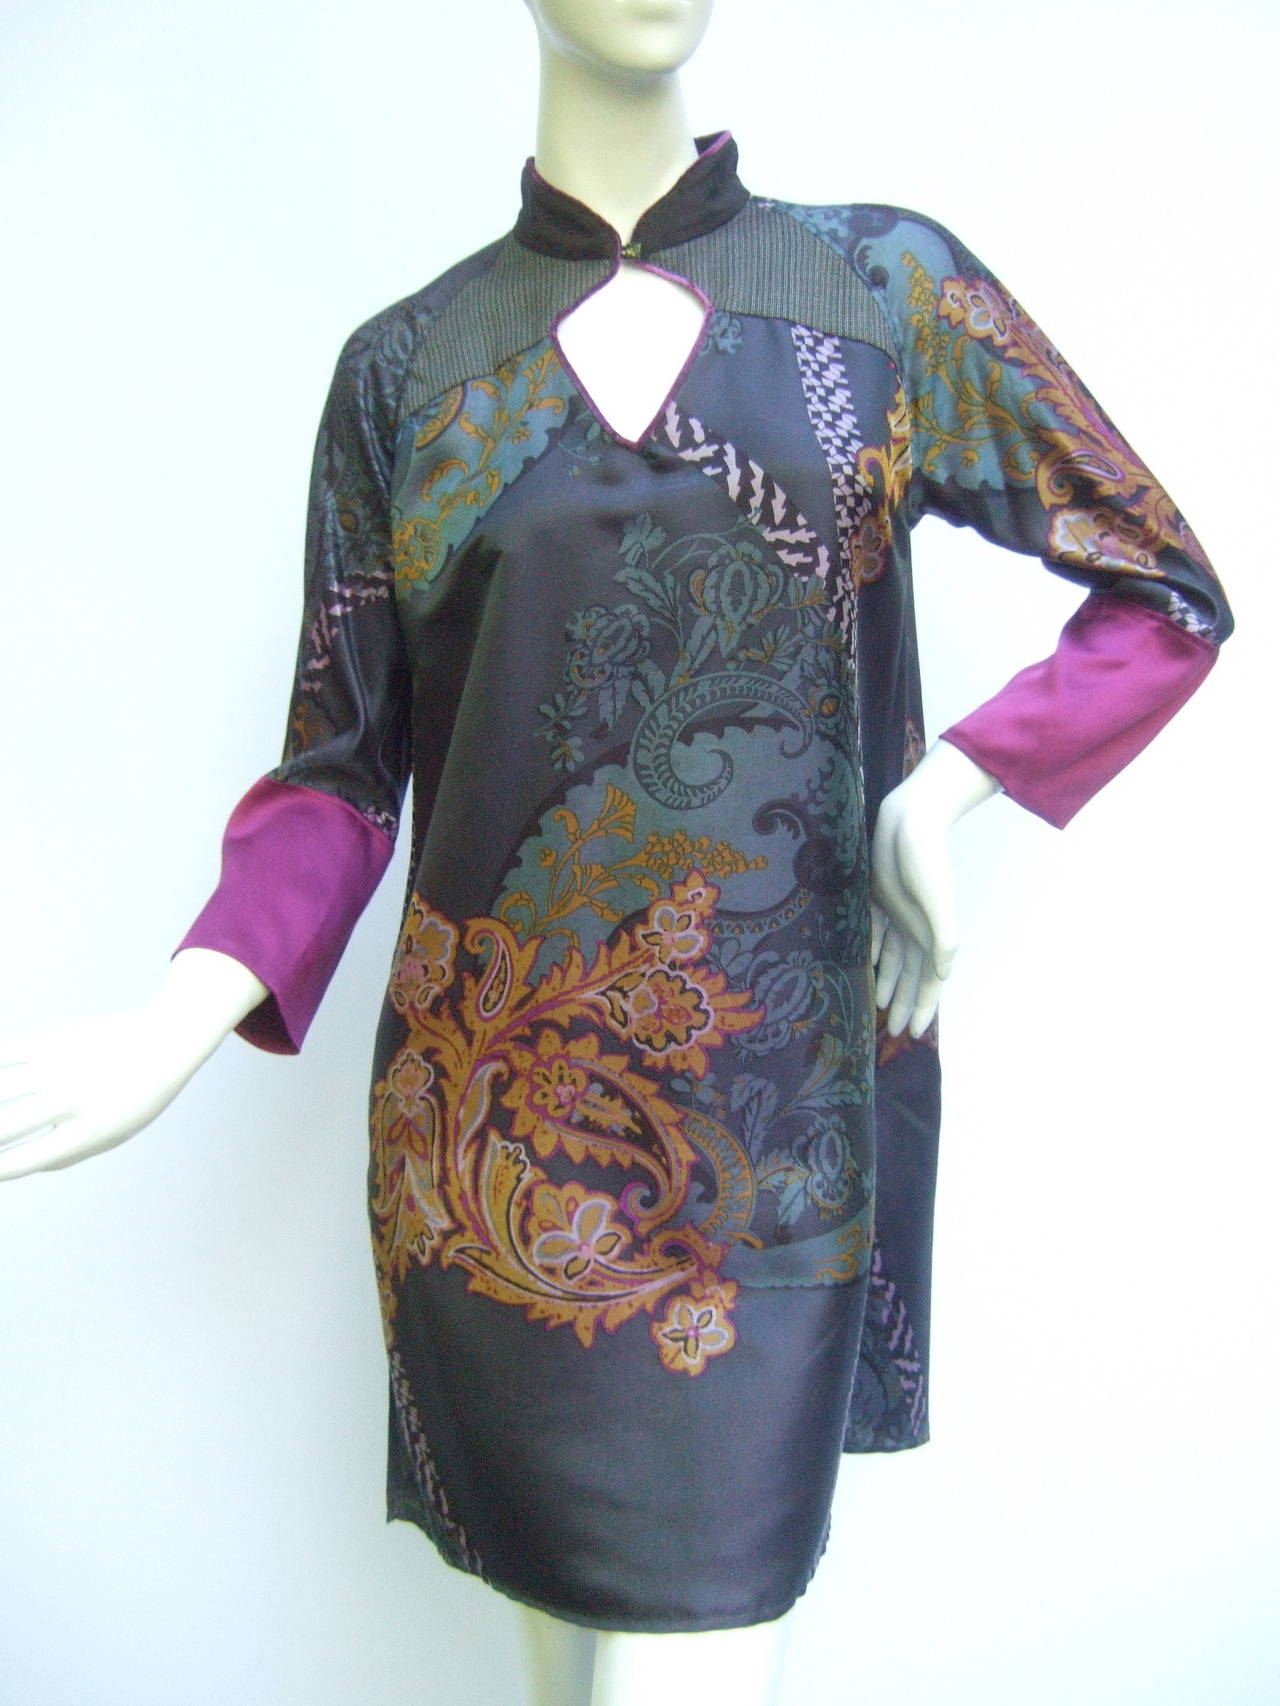 Etro Exotic silk print tunic dress Made in Italy Size 40
The beautiful silk dress is designed with a paisley floral print set against a pewter gray background. The lush flowers burst against the muted gray background. The collage of vibrant